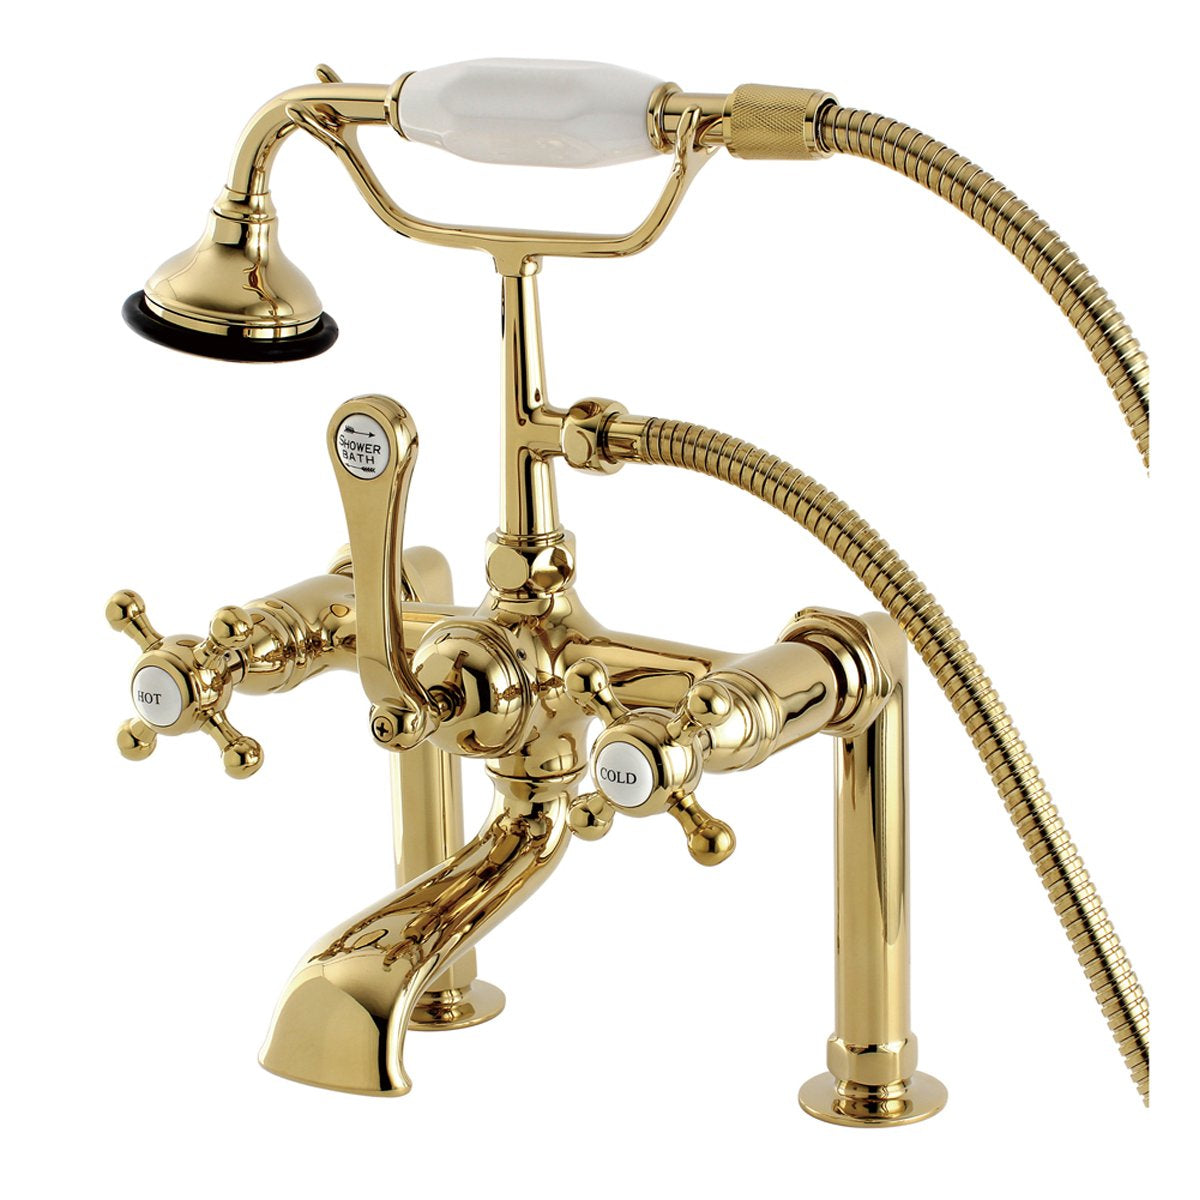 Kingston Brass Aqua Eden AE103T2BX English Country Deck Mount Clawfoot Tub Faucet in Polished Brass-Tub Faucets-Free Shipping-Directsinks.